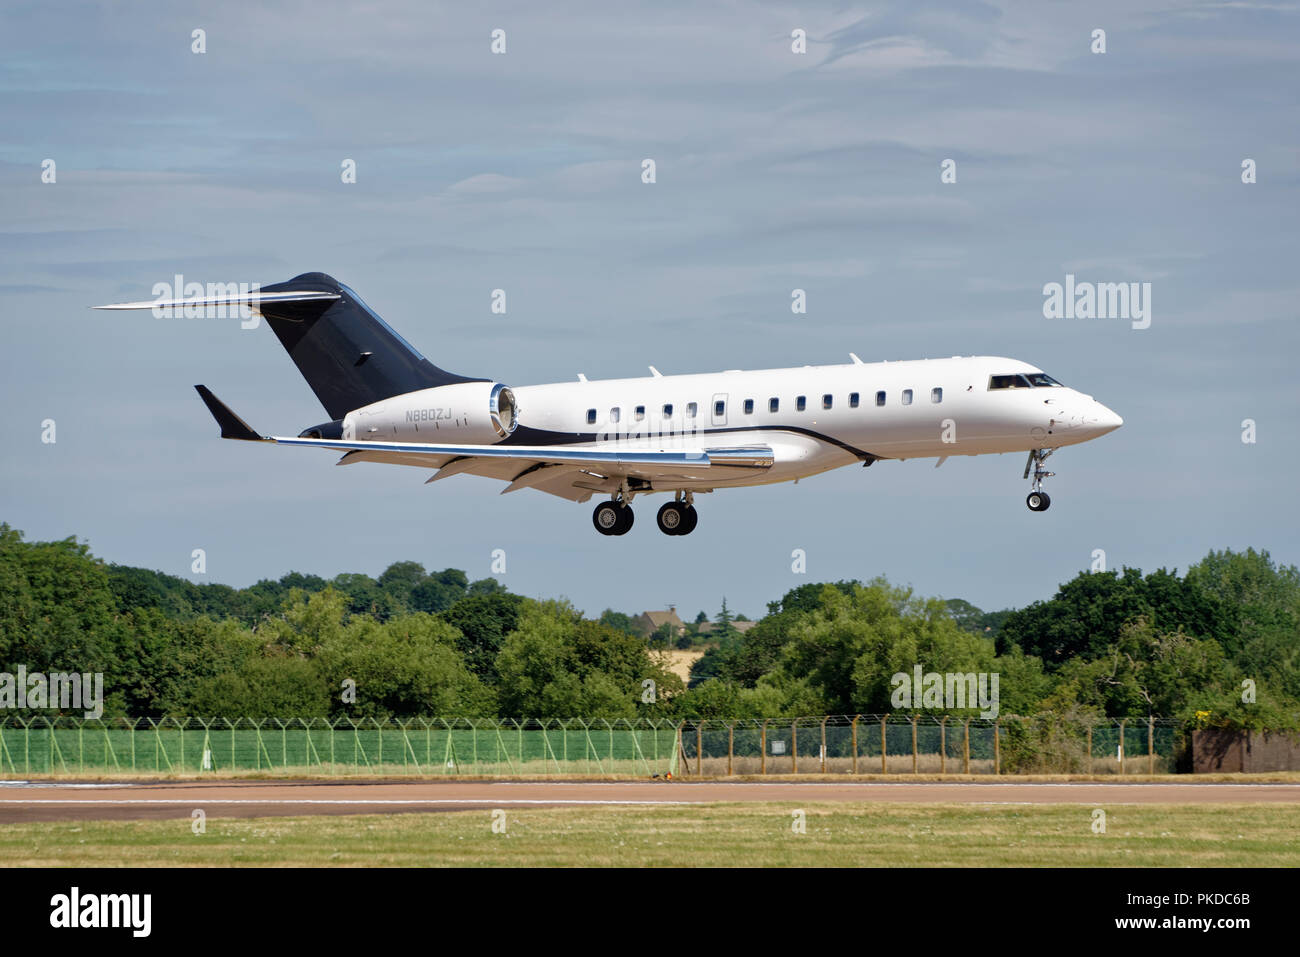 Bombardier BD-700 Global Express Business Jet arriva a RAF Fairford in inglese il Cotswolds per partecipare al RIAT Air Show Foto Stock